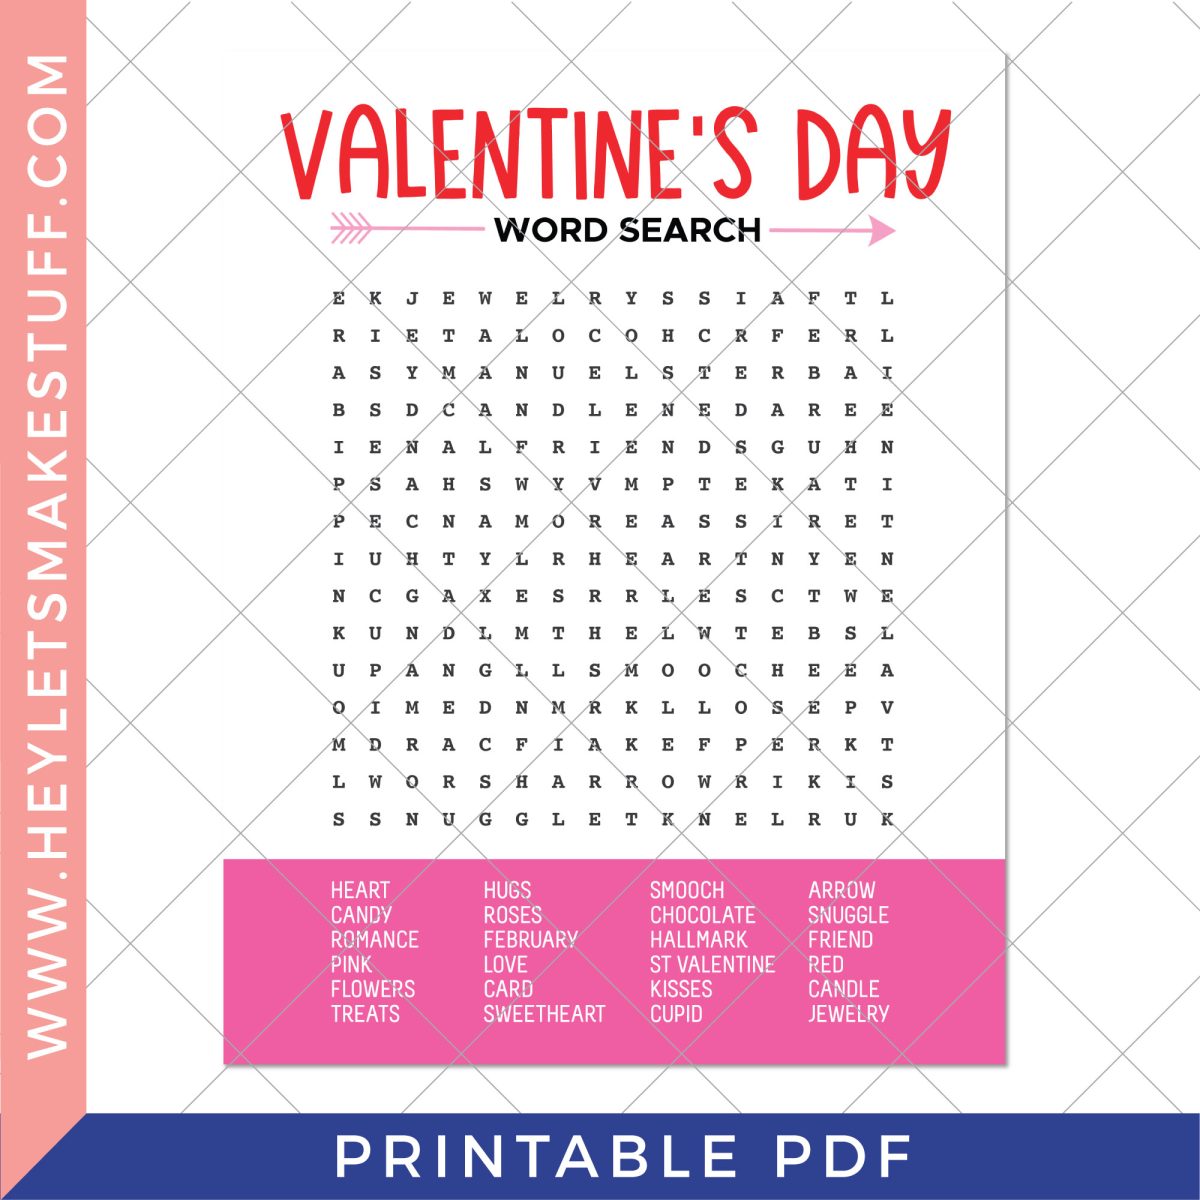 Security image for Valentine's Day Word Search